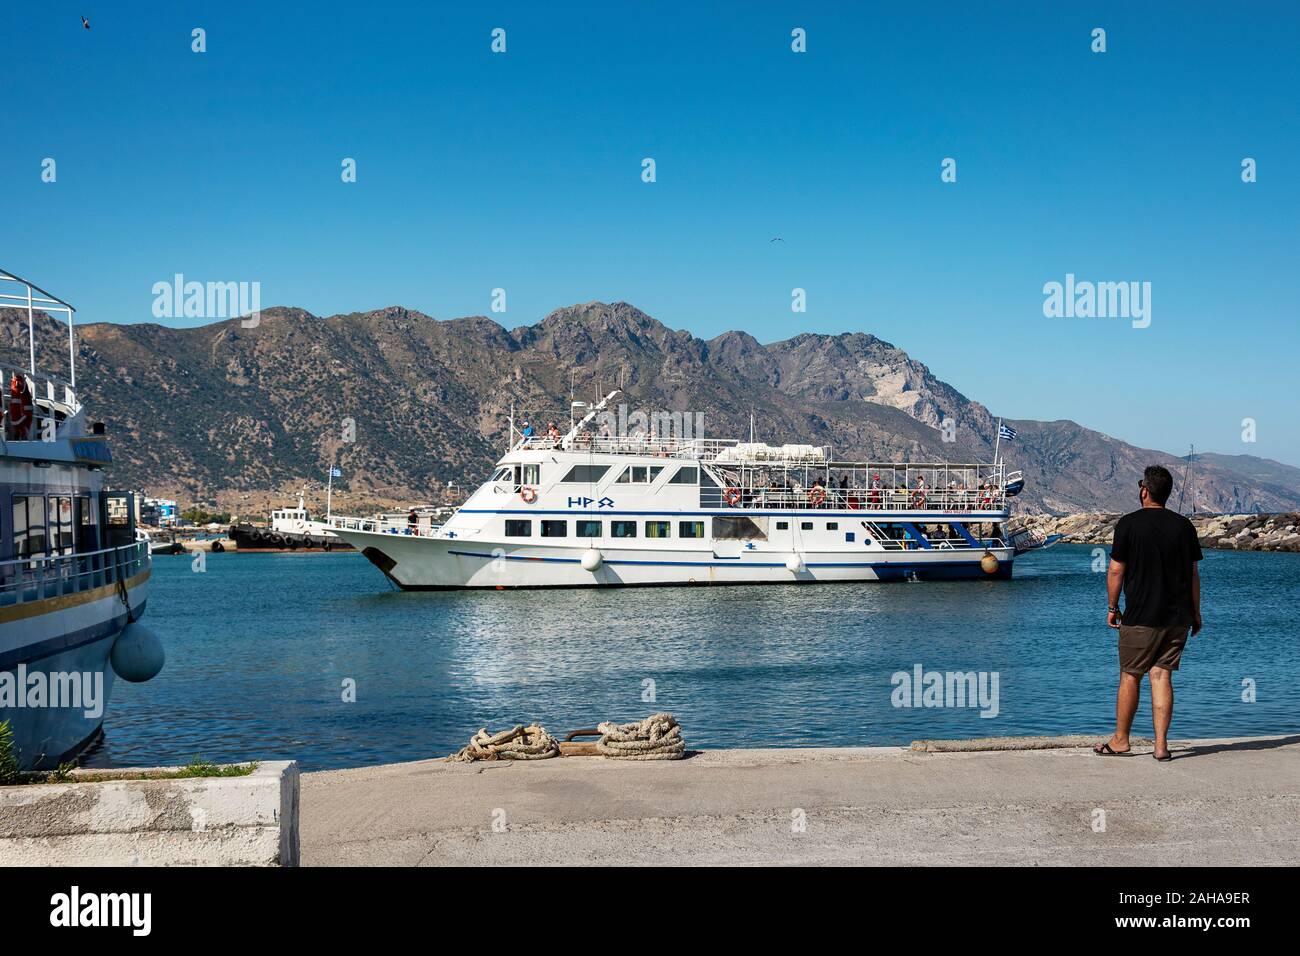 GREECE, KOS - MAY 31: Kardamena is a small town on the south coast of Kos and has all the makings of a great beach holiday. Passenger ship coming to t Stock Photo